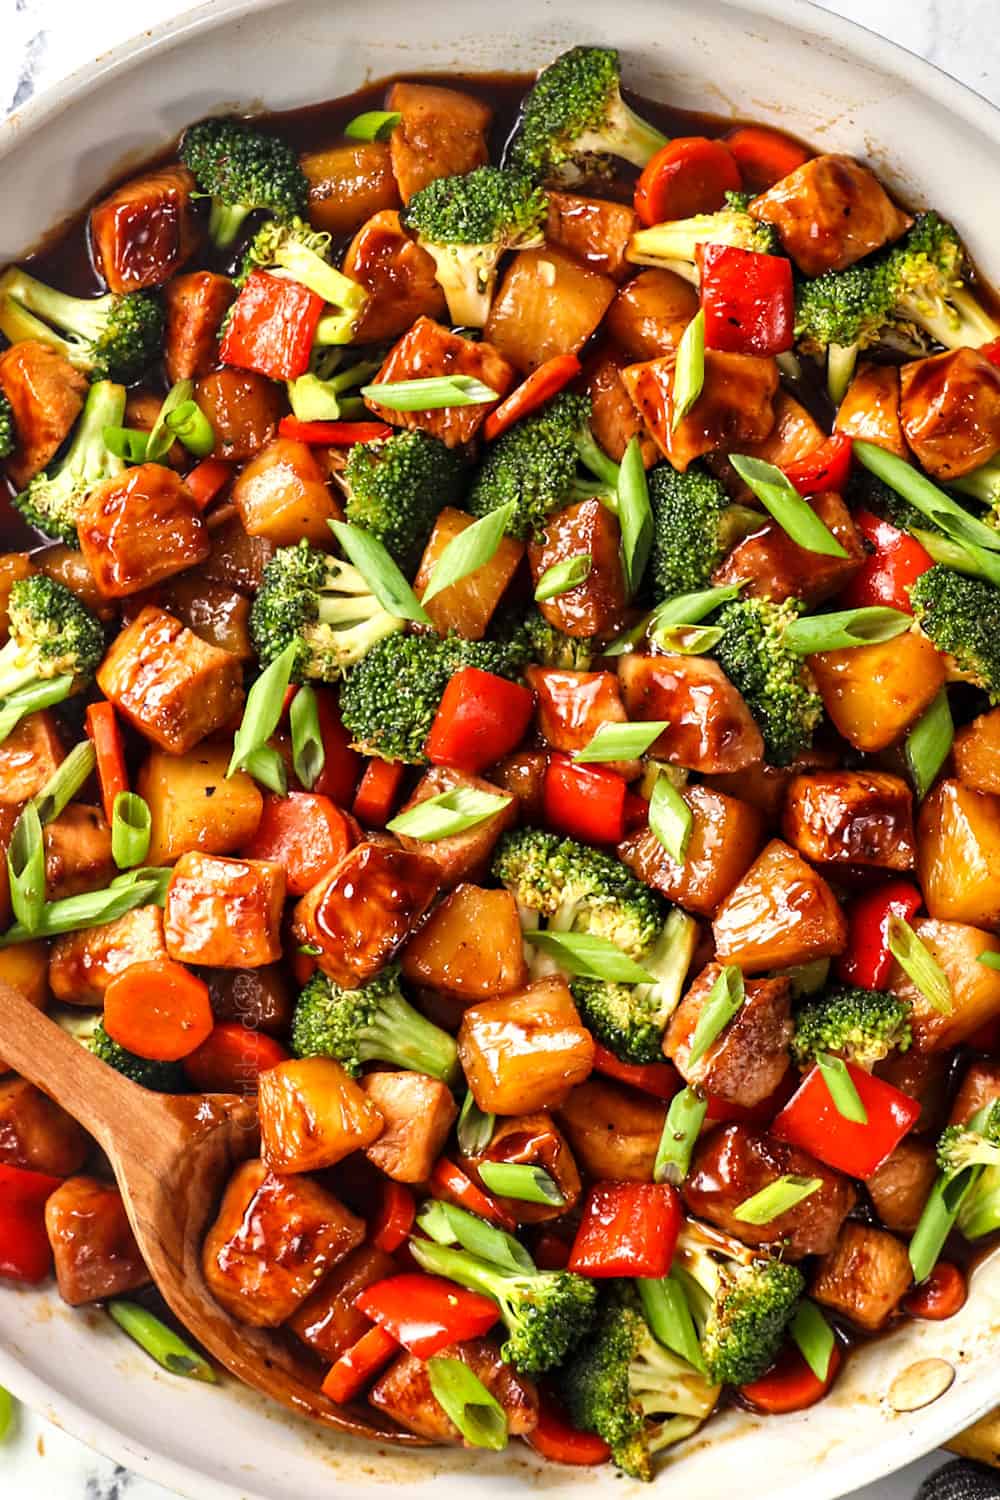 top view of teriyaki chicken stir fry with chicken and vegetables